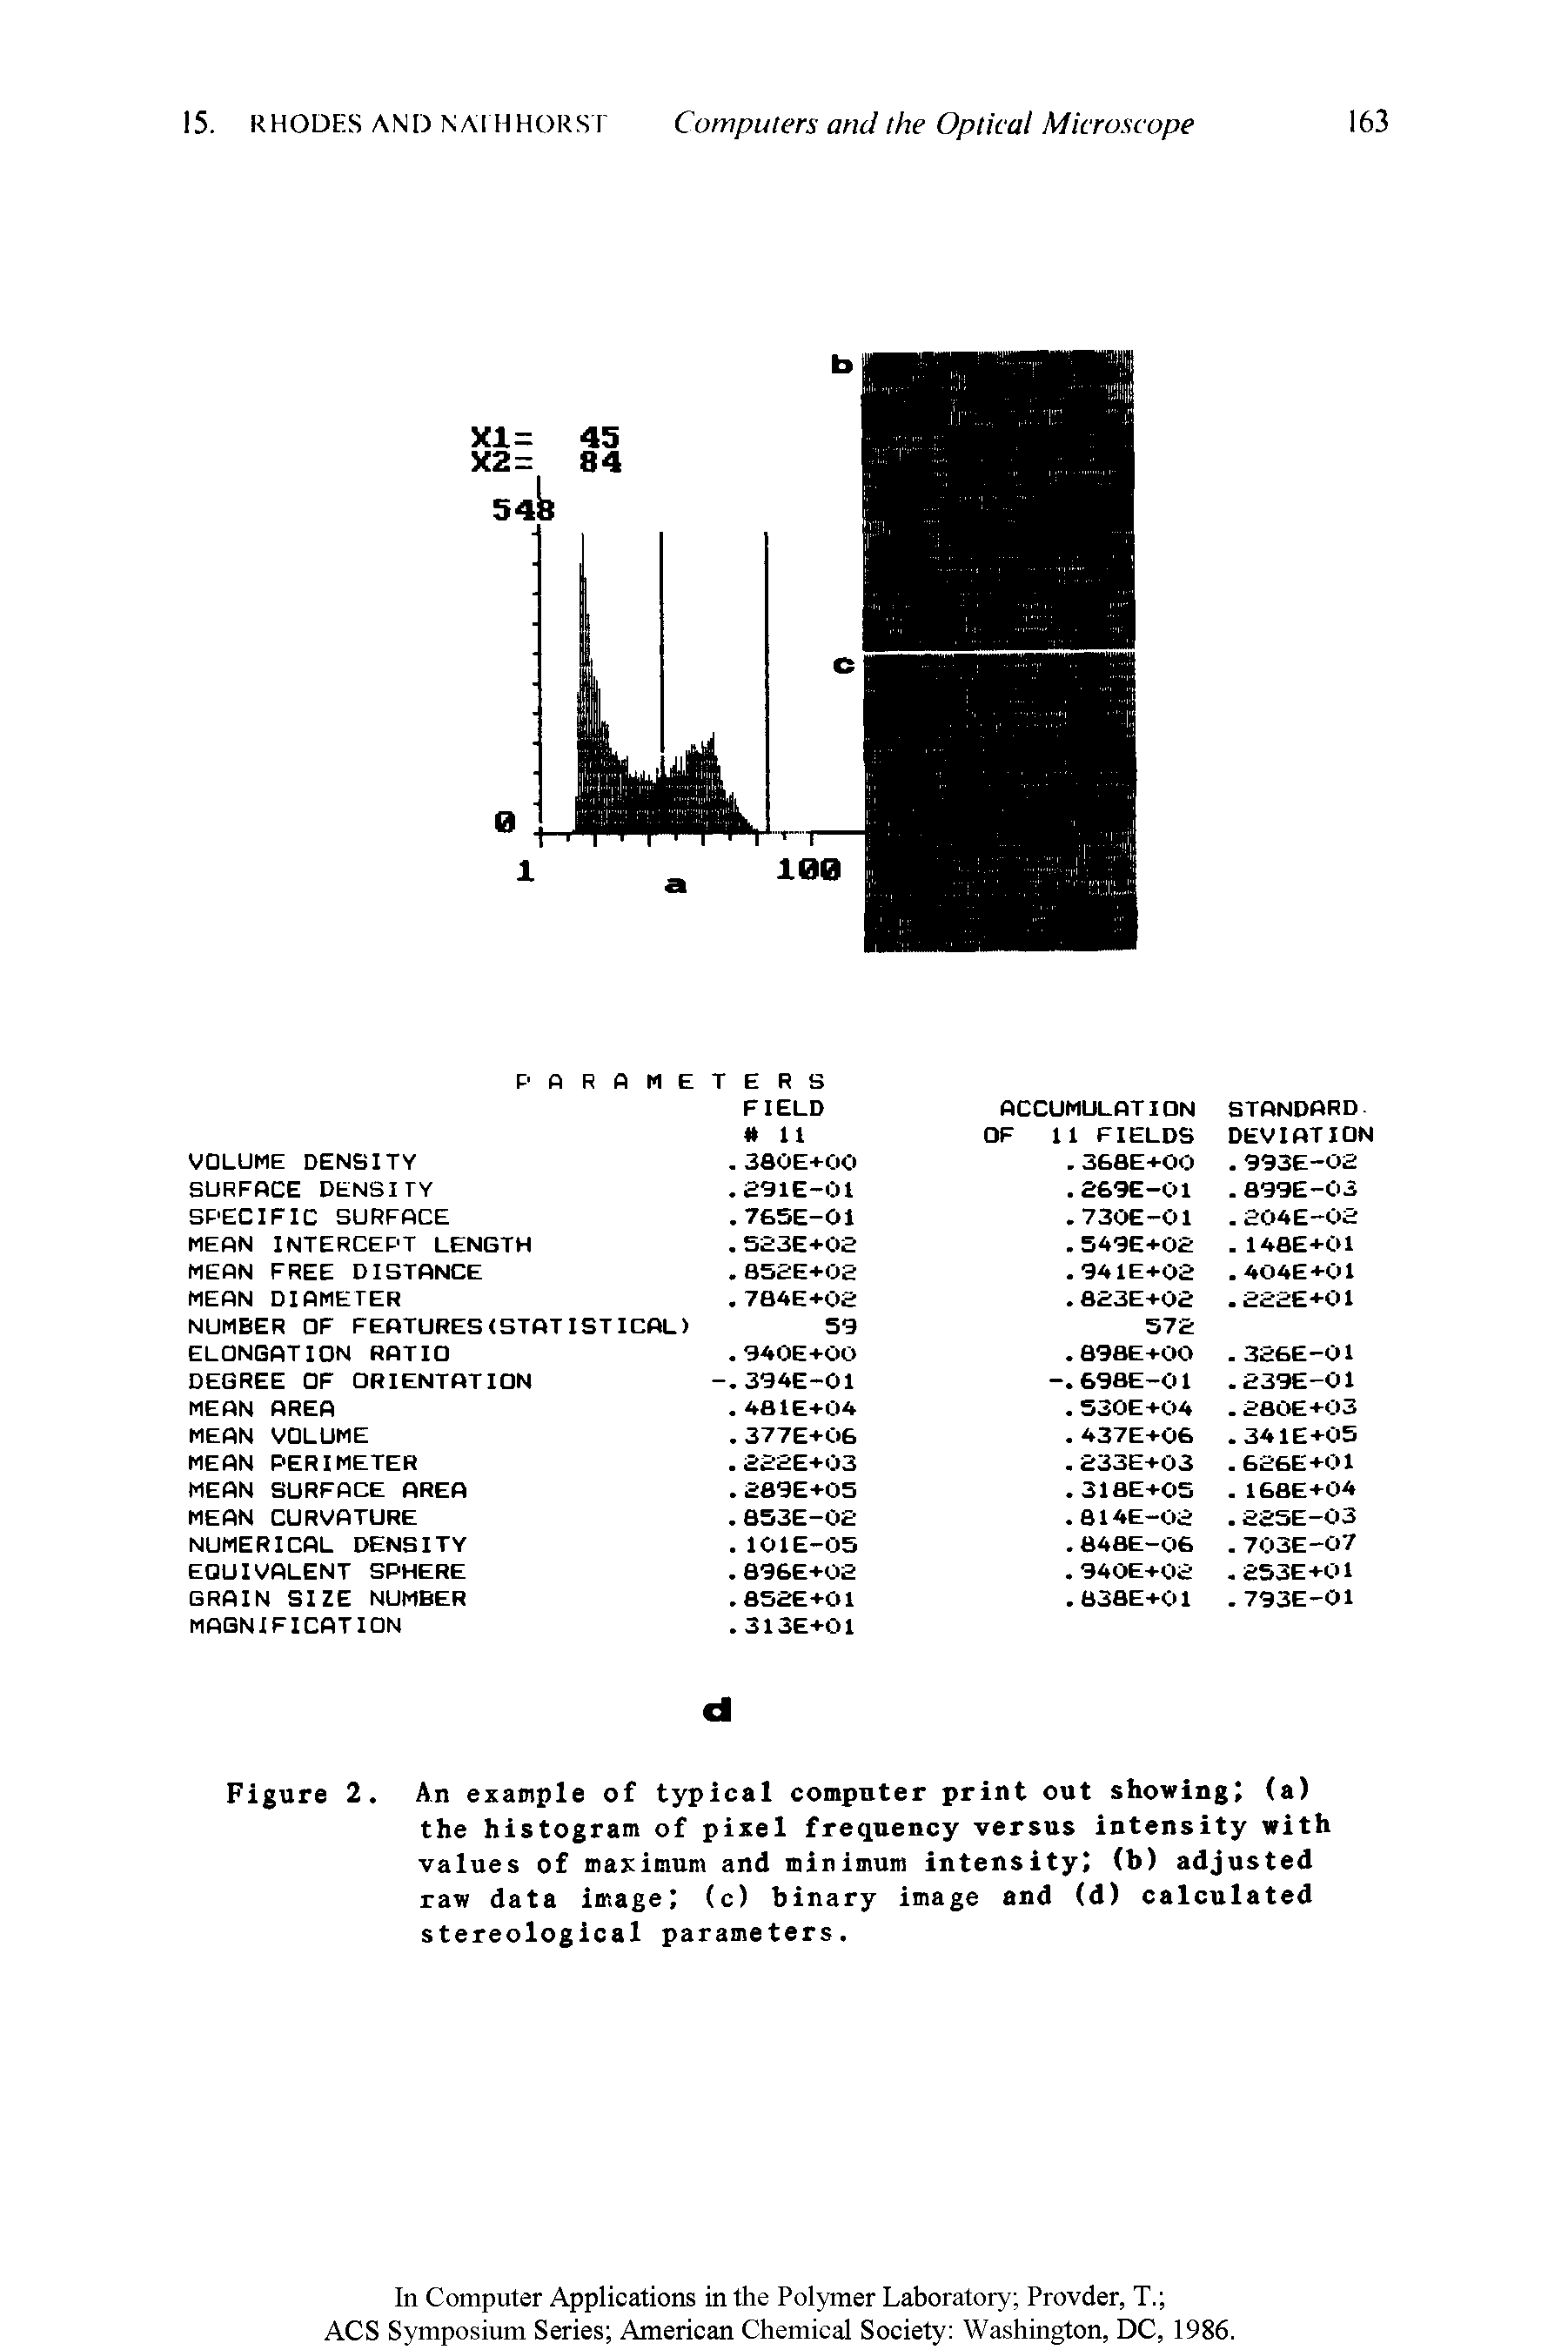 Figure 2. An example of typical computer print out showing (a) the histogram of pixel frequency versus intensity with values of maximum and minimum intensity (b) adjusted raw data image (c) binary image and (d) calculated stereological parameters.